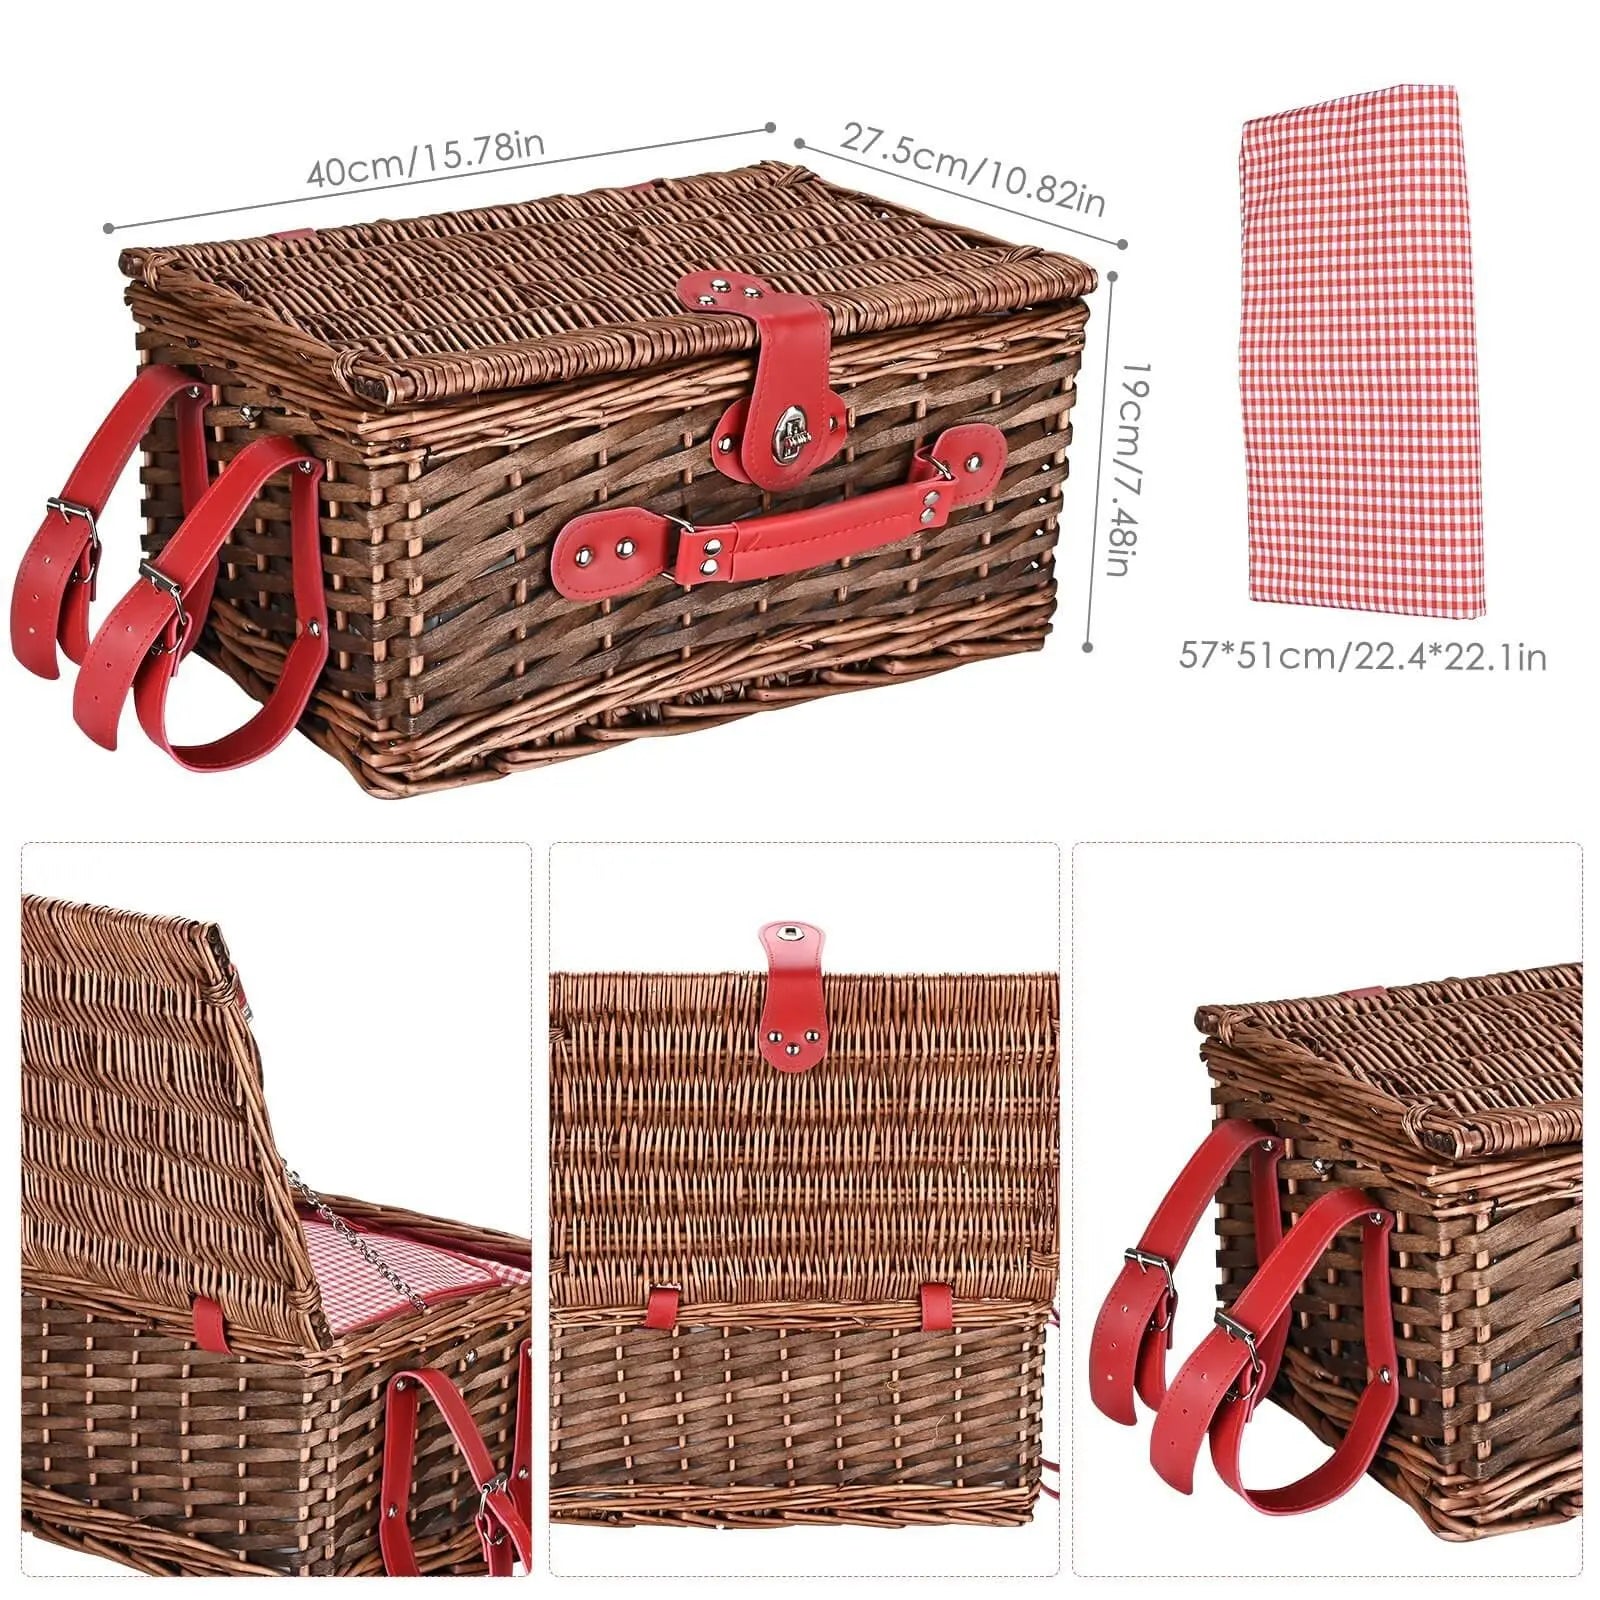 Hedgehog Decor picnic basket in a picturesque outdoor setting by a lake, showcasing its style and portability.